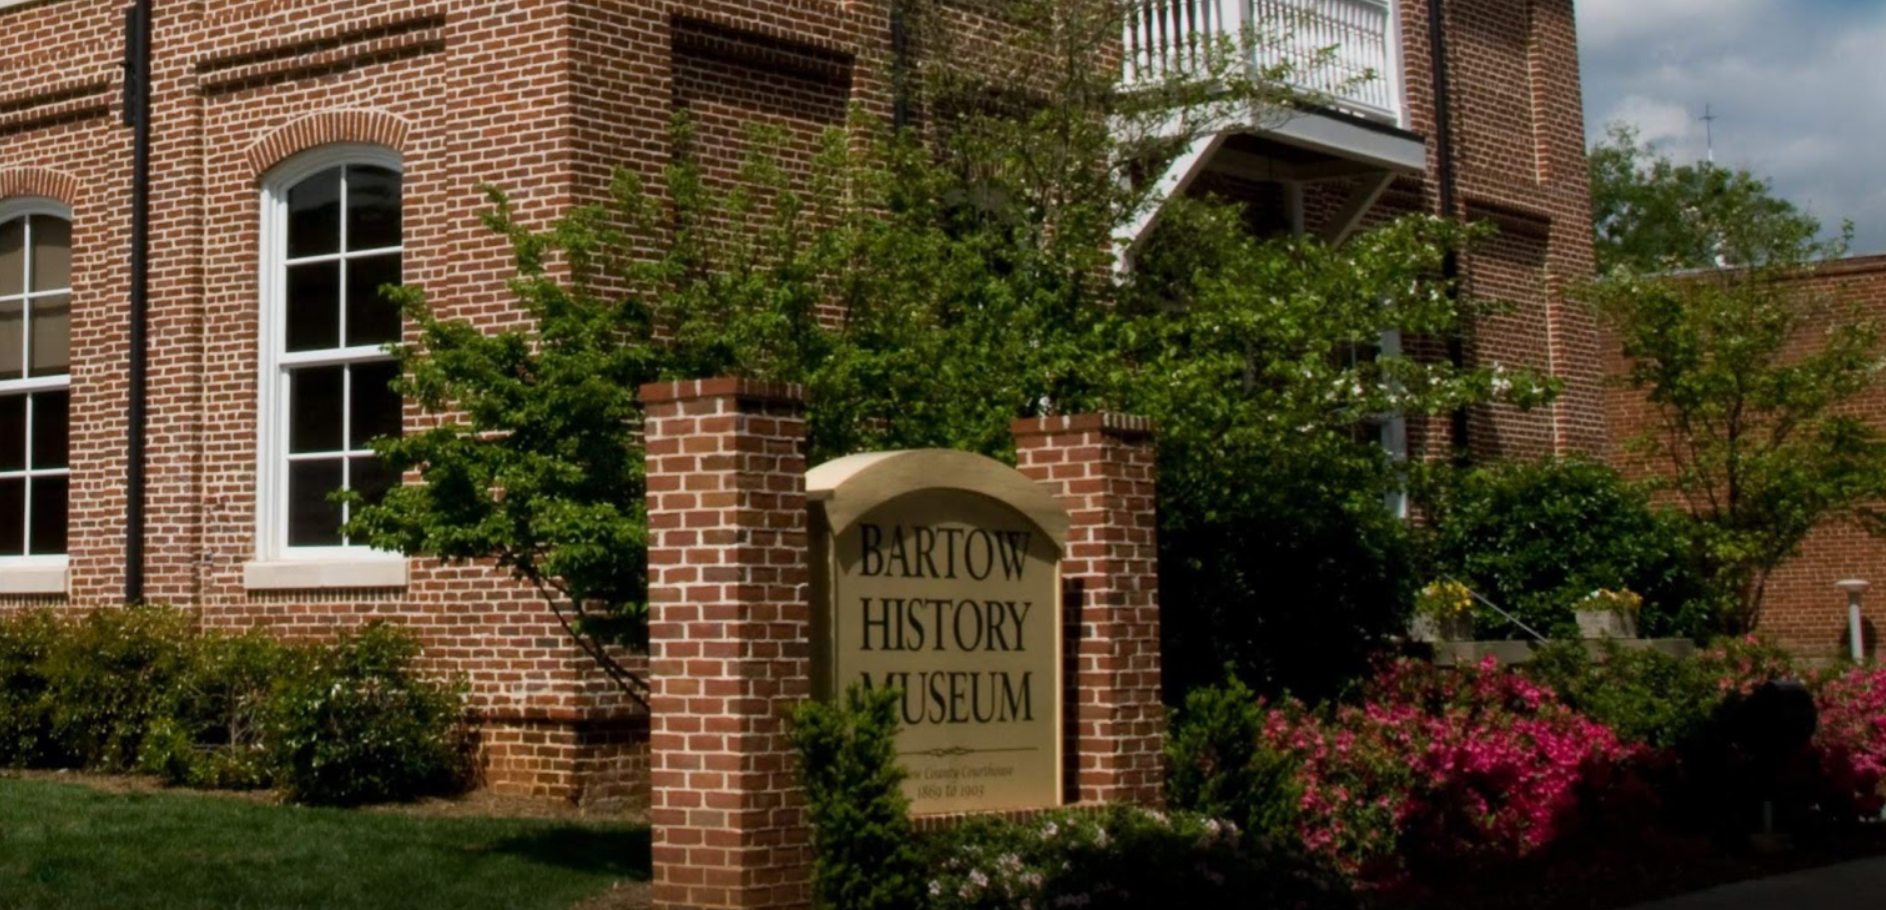 history museum, civil war, event rentals, Historic Downtown Cartersville, Georgia, Bartow History Museum School Field Trips, etowah, bartow county schools, union, confederate, girl scouts, educational, settlers, native american, pottery, home school, history comes alive, georgia museum, cartersville museum